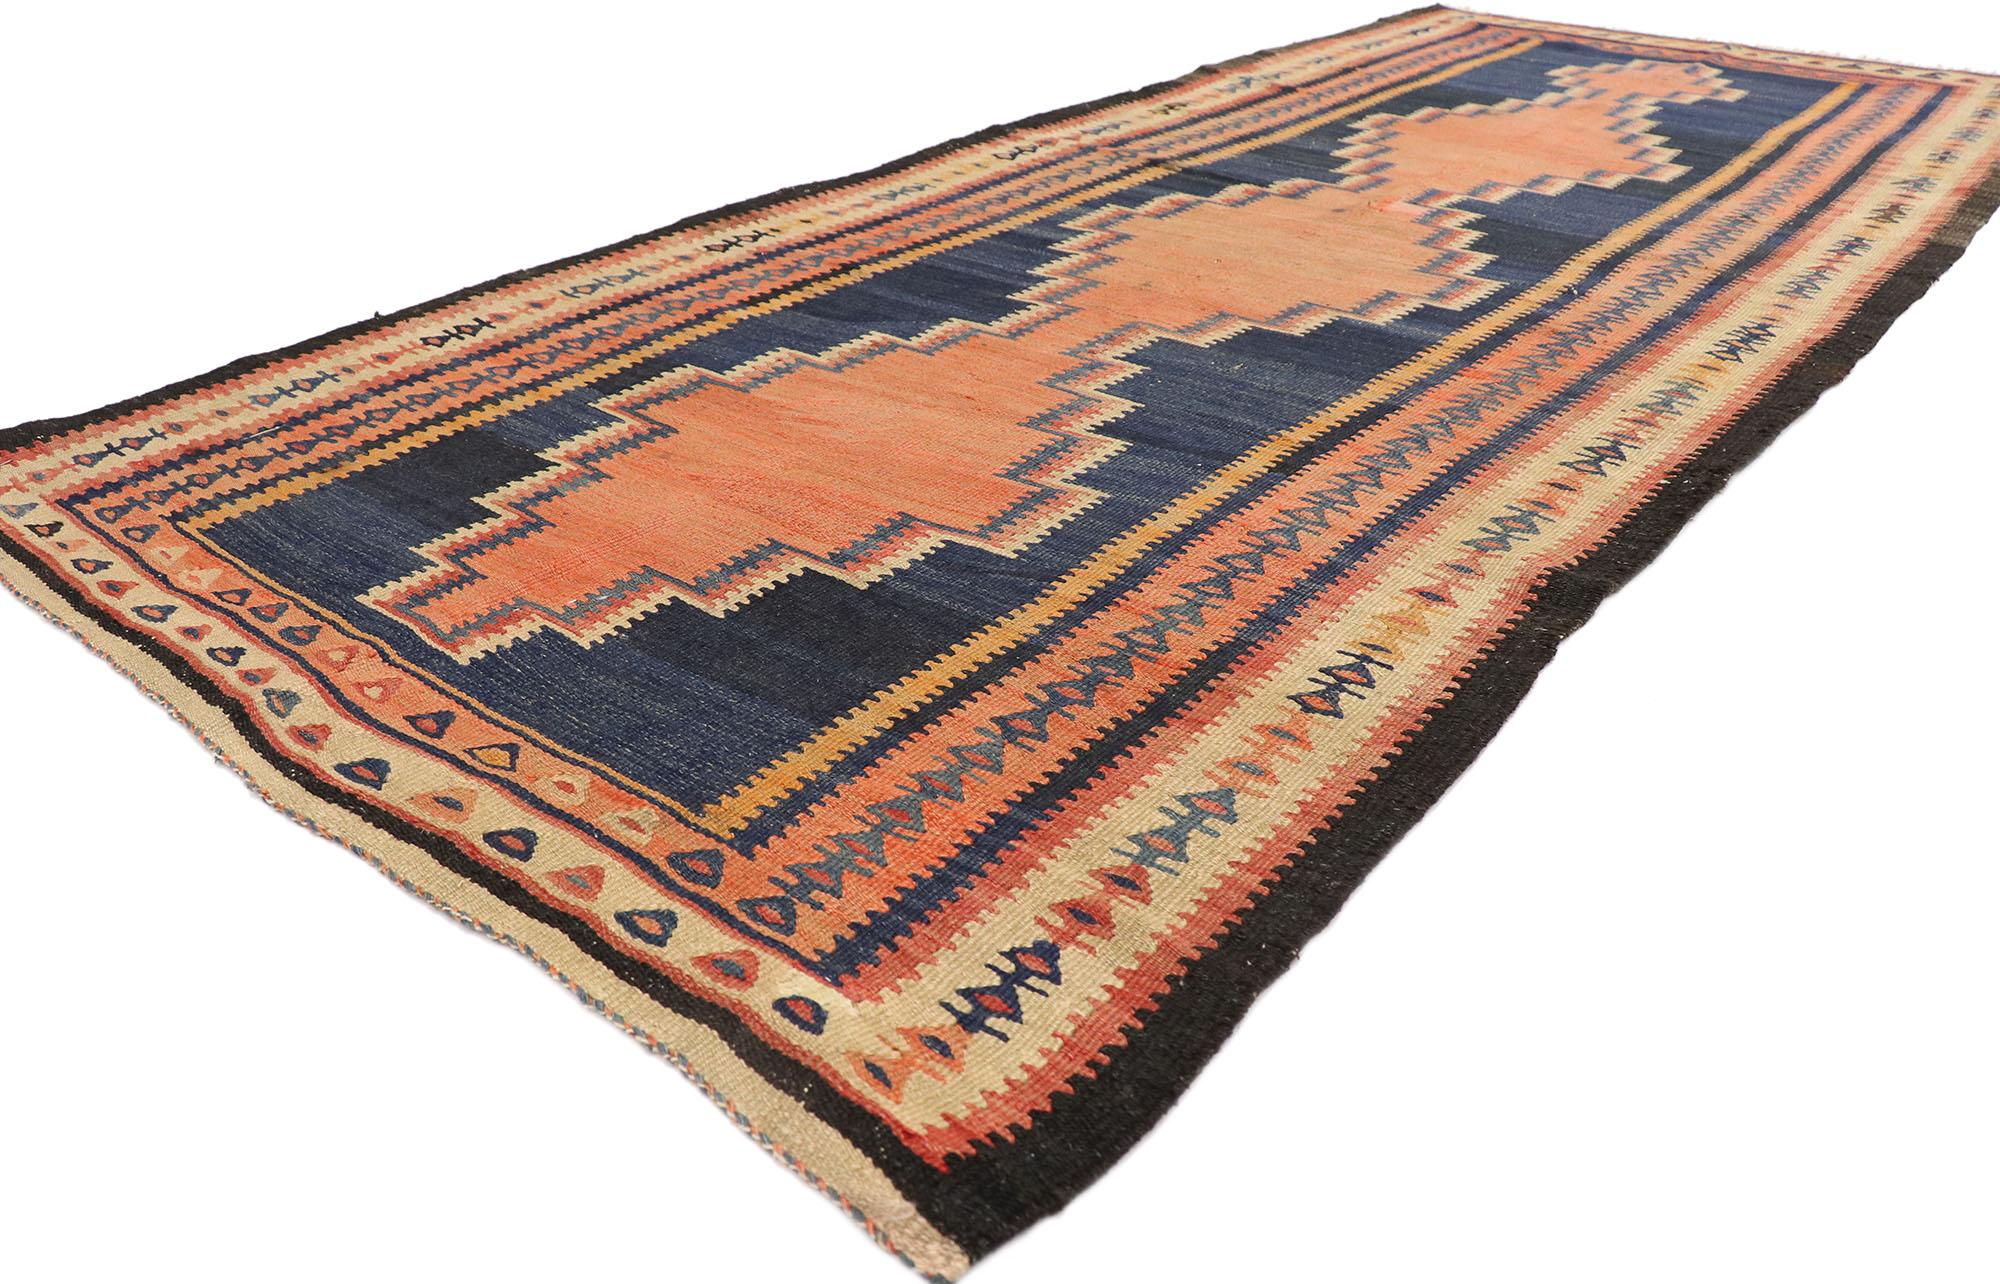 77942 Vintage Persian Bijar Kilim Rug, 04'01 x 09'07.
Embark on a captivating journey where nomadic charm gracefully converges with tribal enchantment in our handwoven wool vintage Persian Bijar kilim rug. Rooted in tradition, this flatweave rug